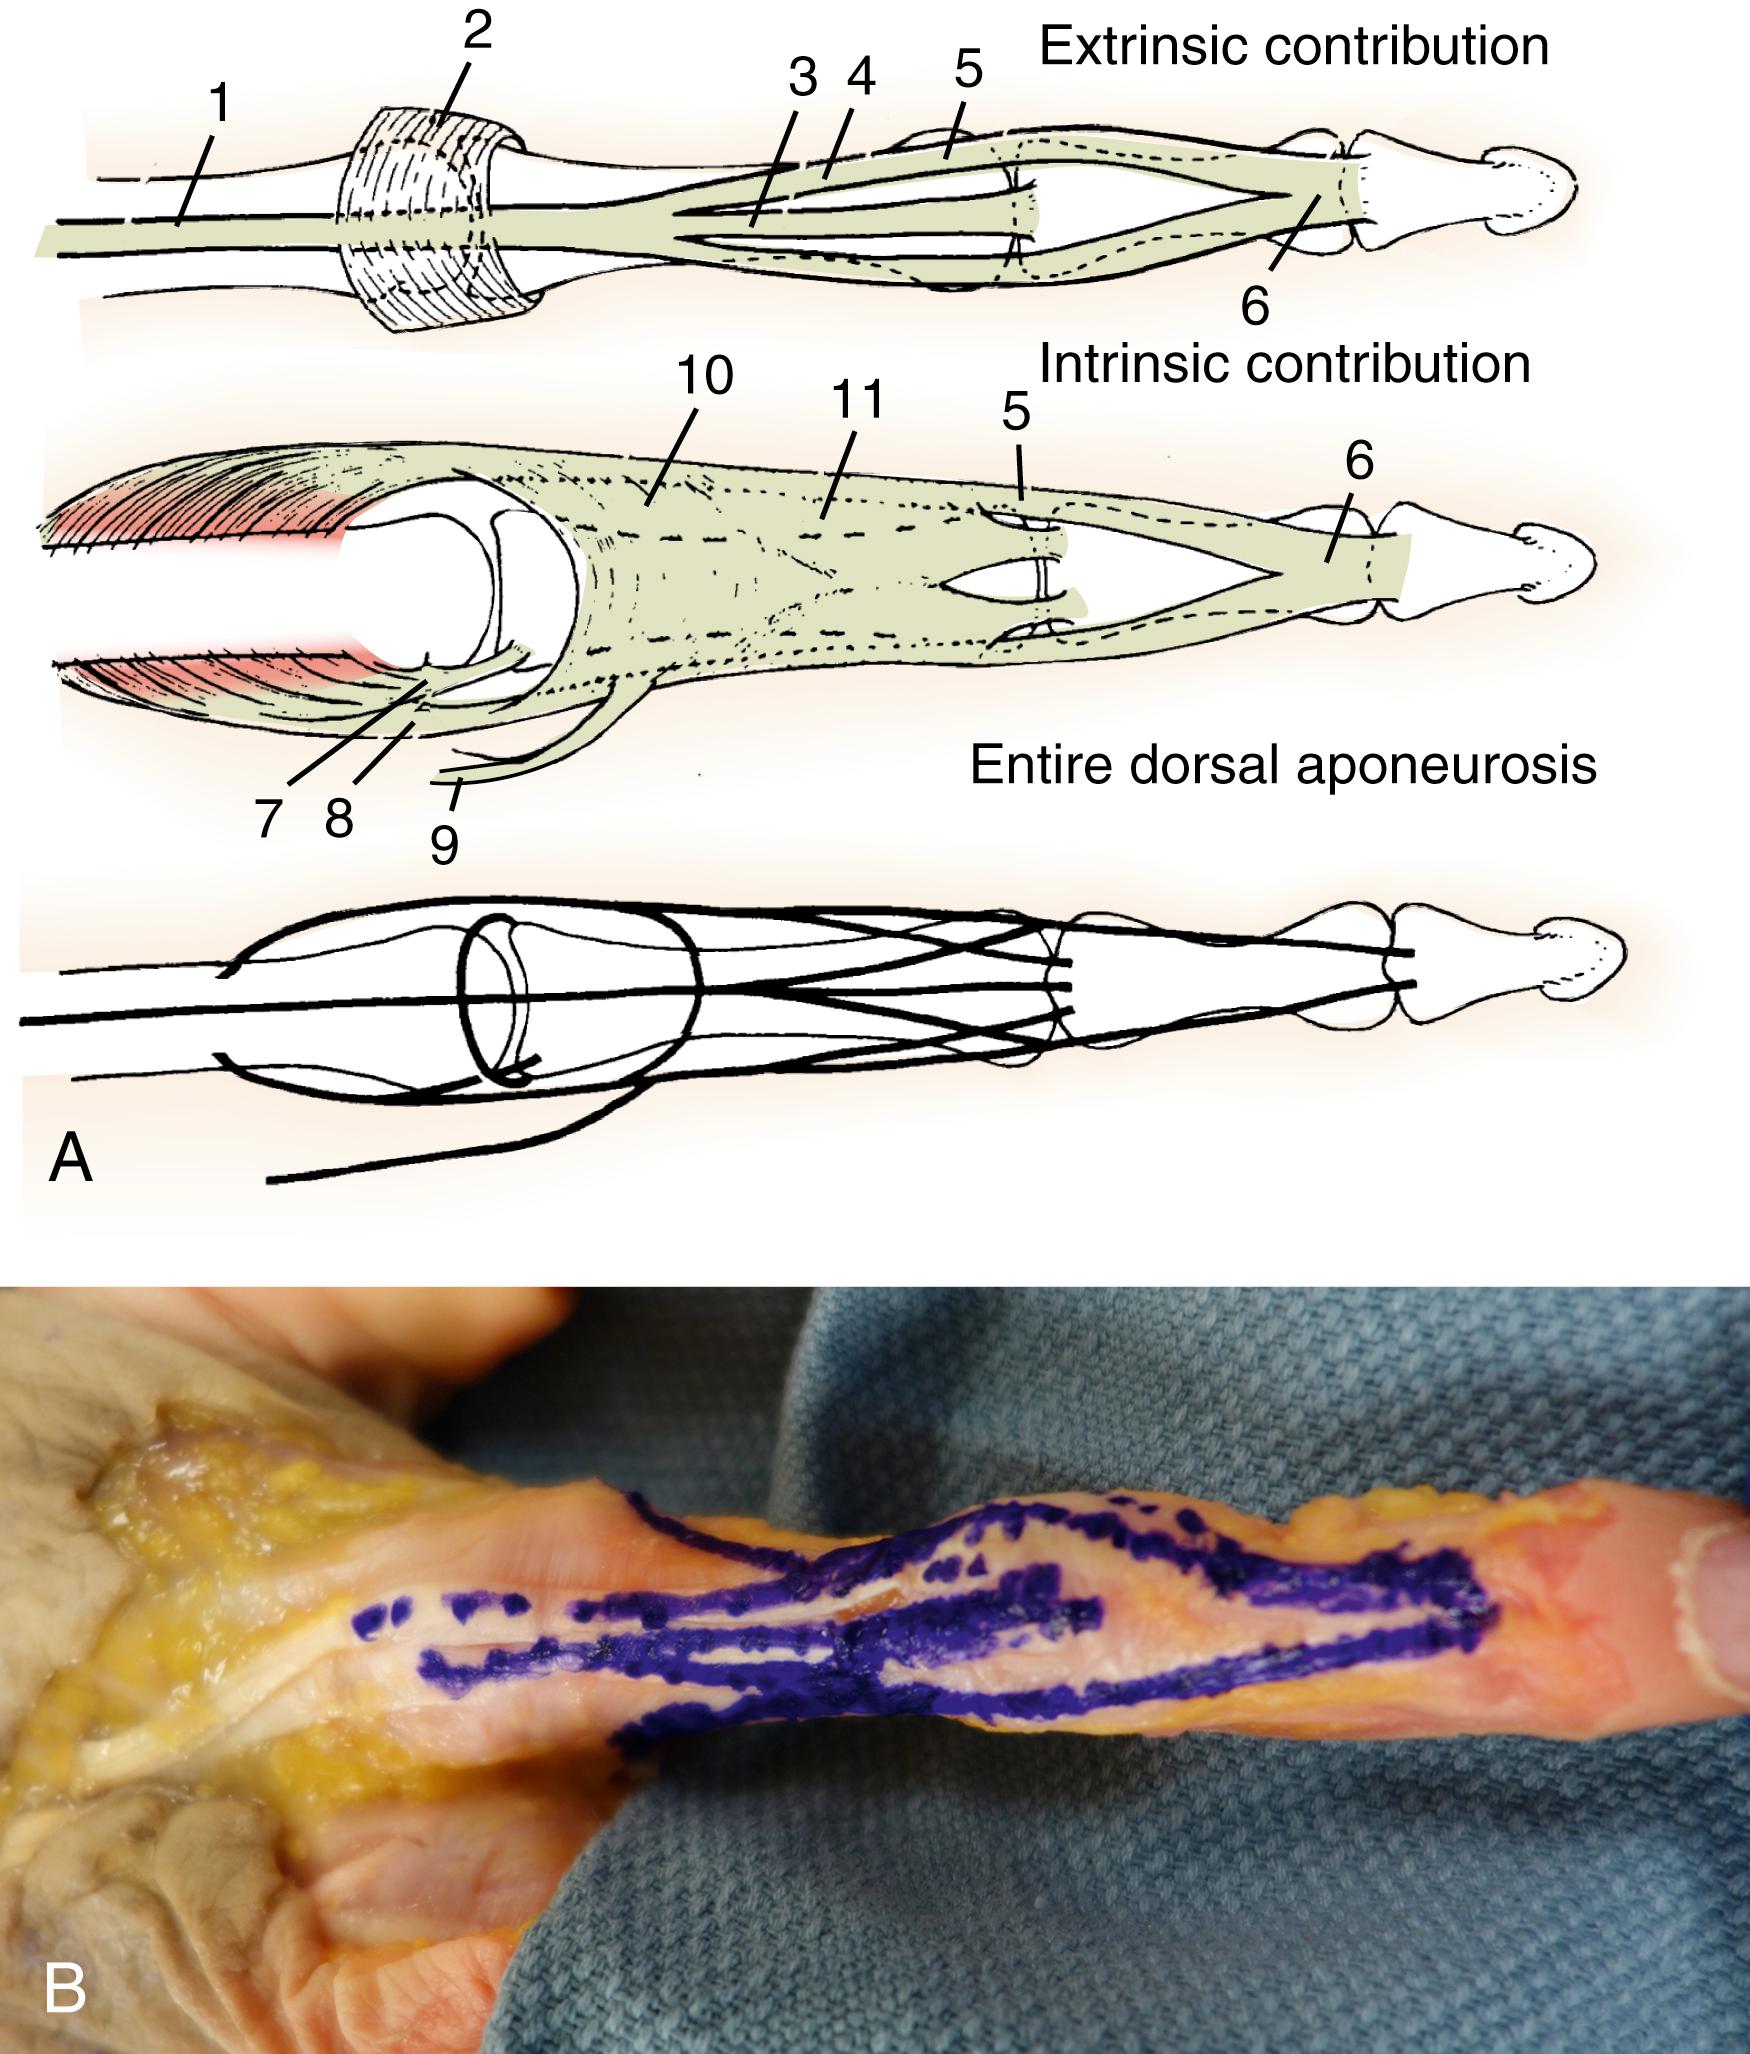 Fig. 10.7, Dorsal view of the dorsal aponeurosis of the finger. A, Diagrammatic representation of the extrinsic and intrinsic contributions of the dorsal aponeurosis. 1, Extensor tendon; 2, sagittal band; 3, central slip; 4, lateral slip; 5, conjoined lateral band; 6, terminal tendon; 7, superficial head and medial tendon of the dorsal interosseous; 8, deep head and lateral tendon of the dorsal interosseous; 9, lumbrical muscle and tendon; 10, transverse fibers of the dorsal aponeurosis; 11, oblique fibers of the dorsal aponeurosis. B, Dissected specimen showing the dorsal aponeurosis of the finger. The central slip, lateral slips, lateral band, and conjoined lateral band are identified by solid lines over the proximal phalanx. The conjoined lateral bands and terminal tendons are identified by continuous lines over the middle phalanx. The dotted lines represent the transverse fibers (proximally) and oblique fibers (distally) of the dorsal aponeurosis overlying the proximal phalanx.